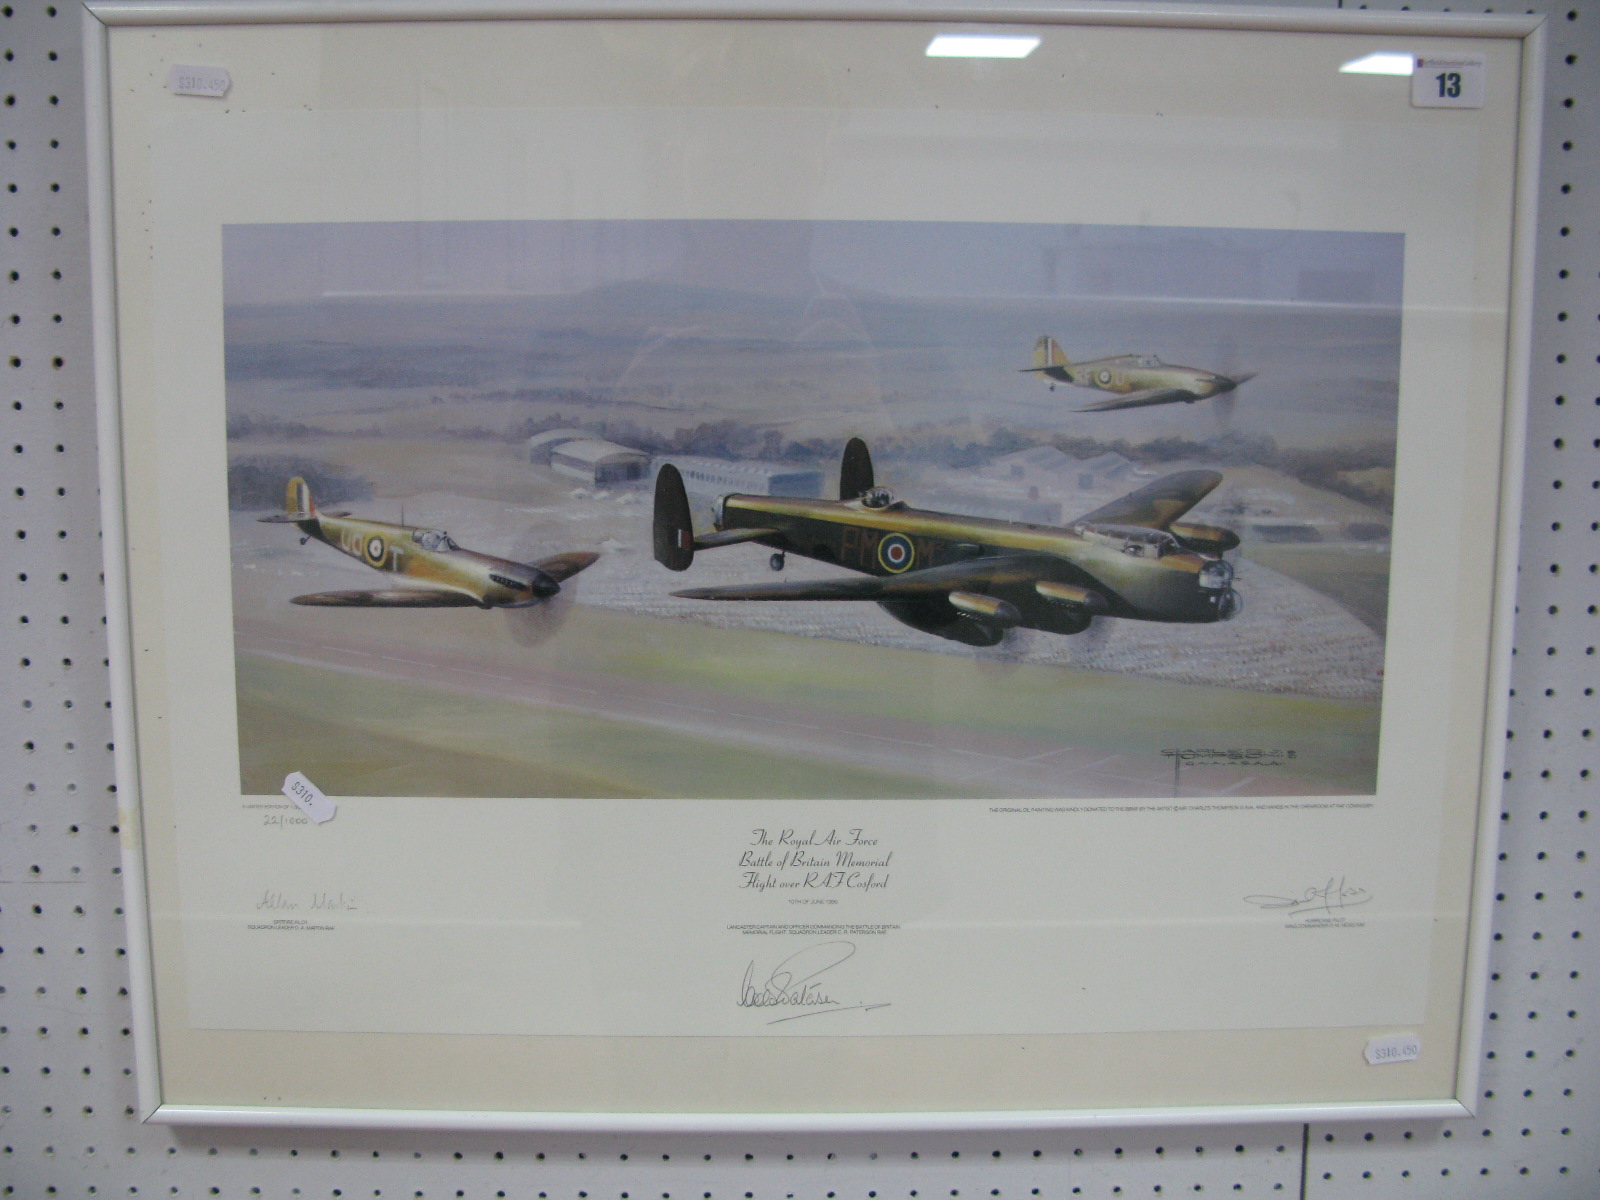 A Framed Print of The Royal Air Force Battle of Britain Memorial Flight Over RAF Cosford, graphite